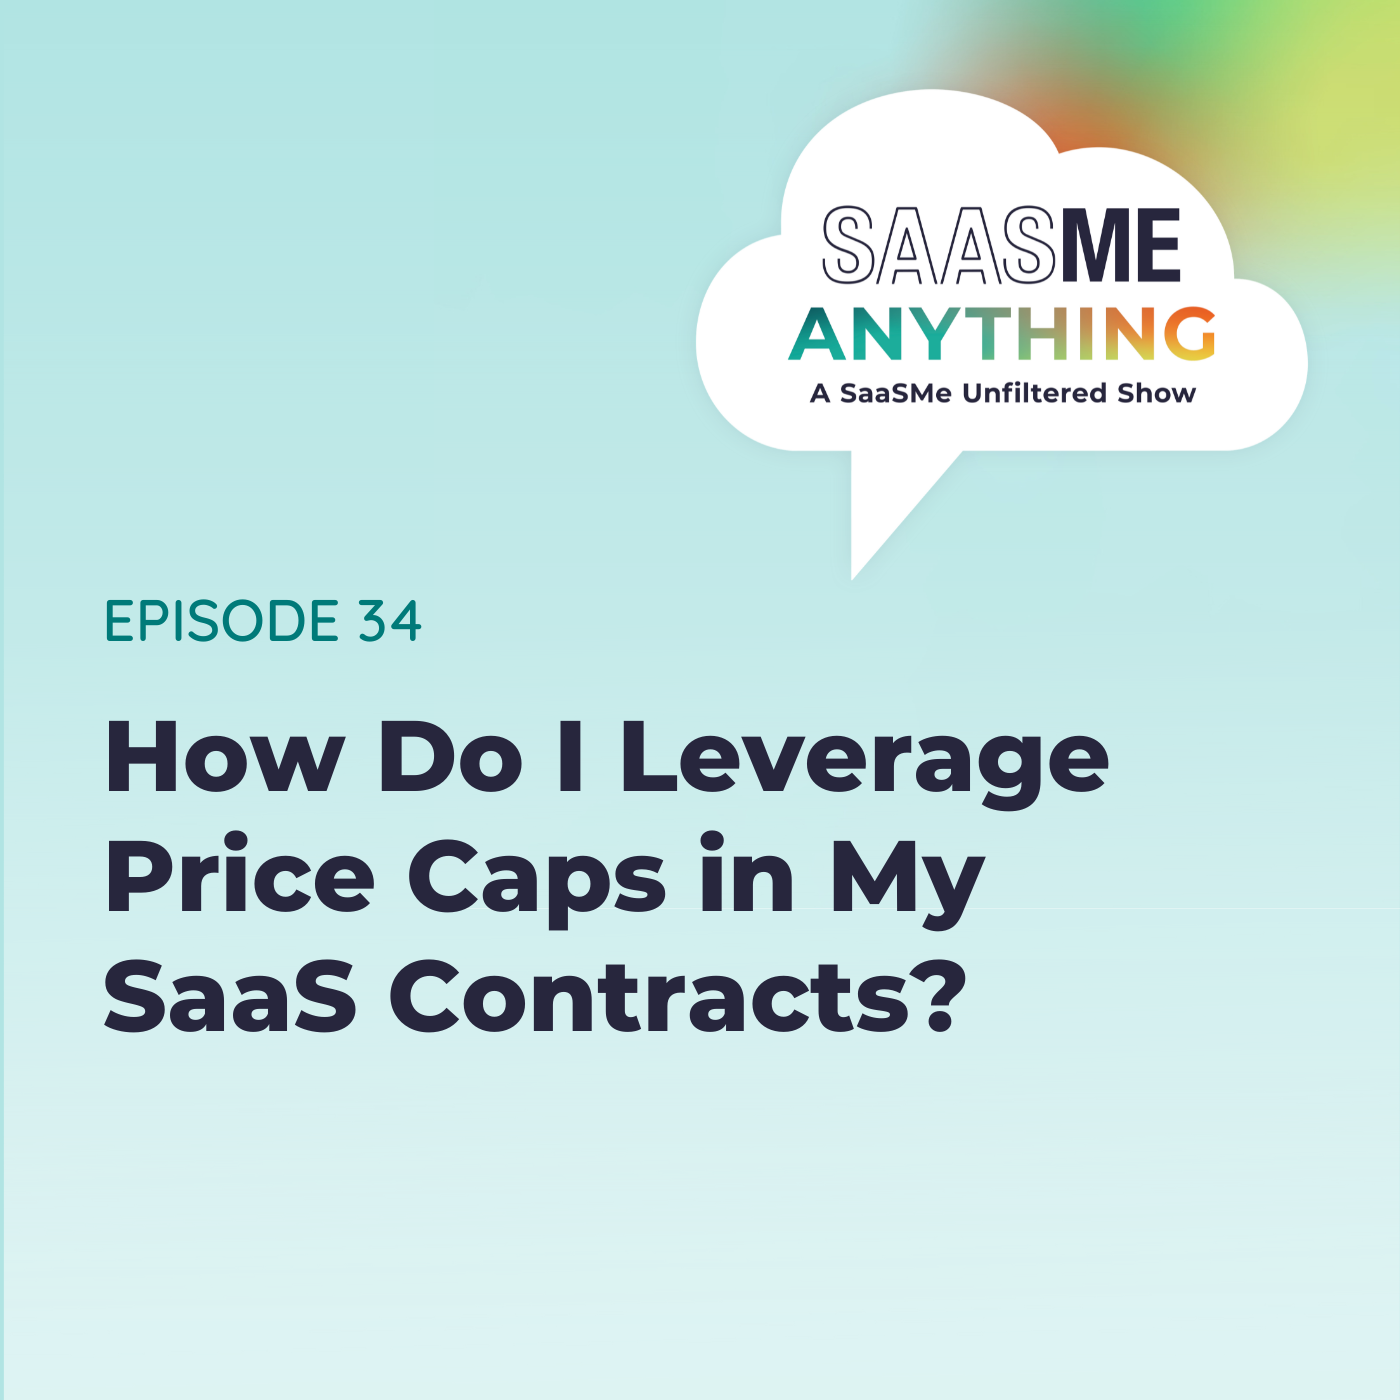 How Do I Leverage Price Caps in My SaaS Contracts?